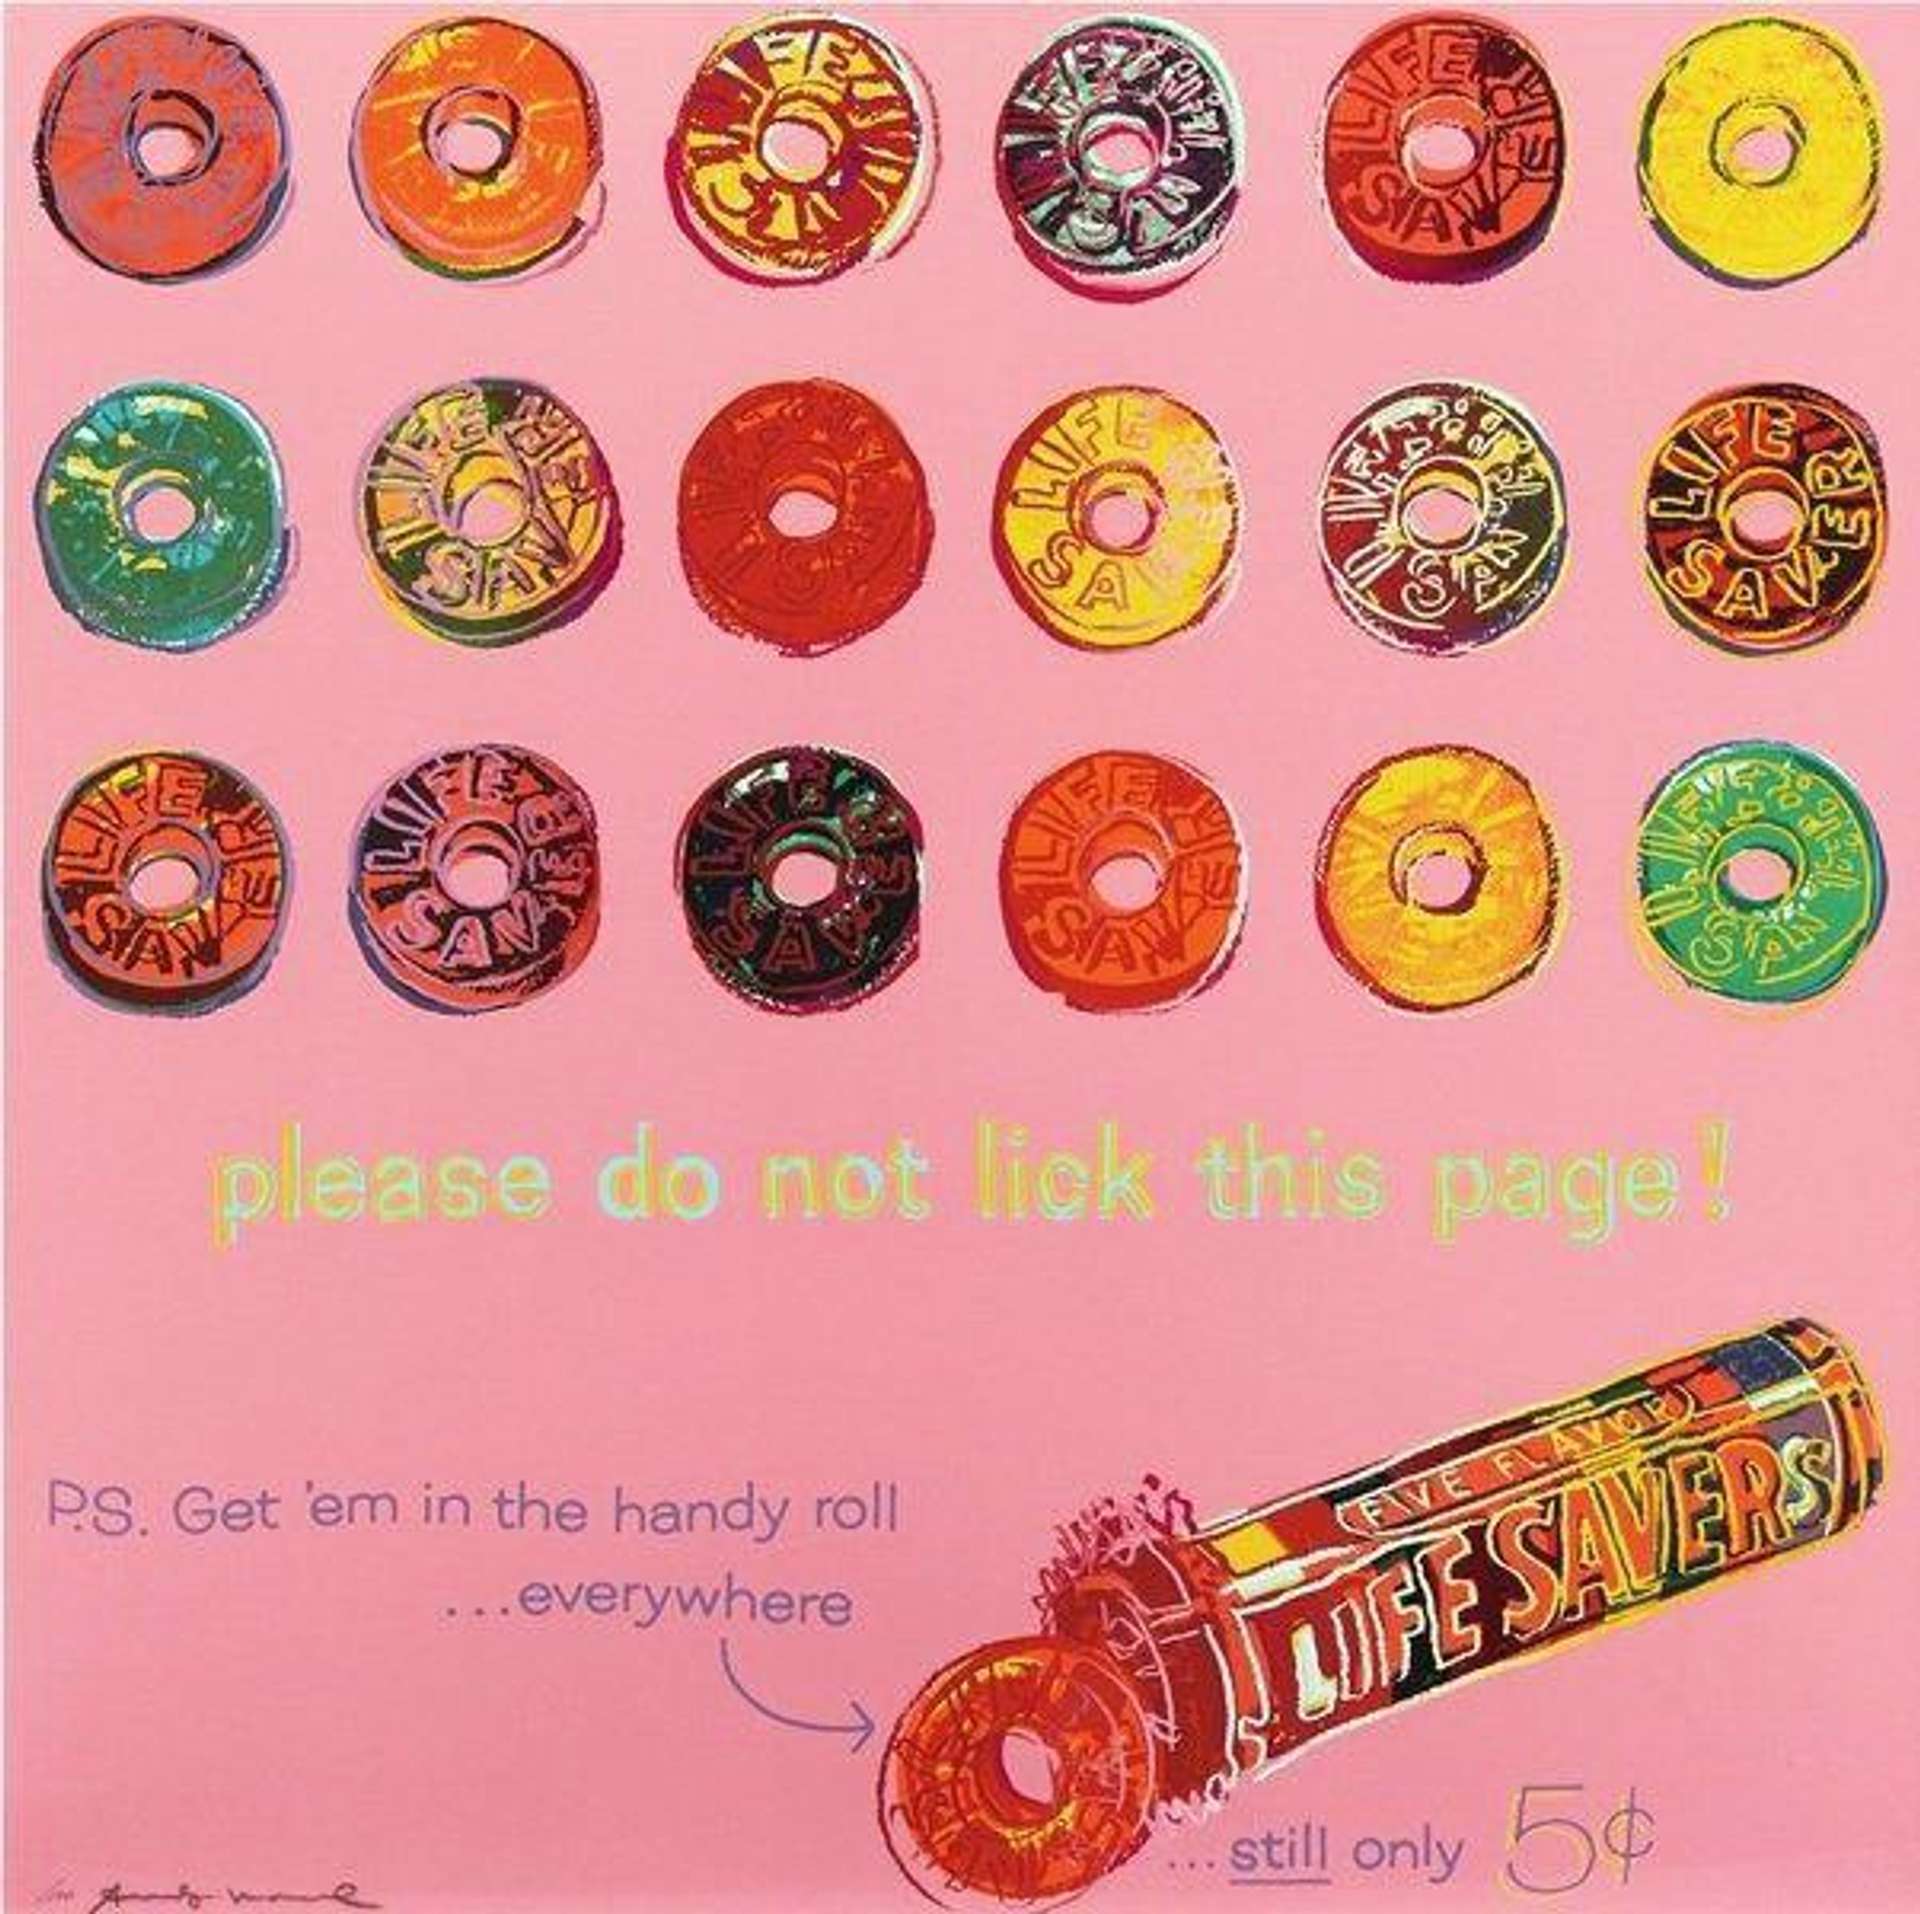 Andy Warhol’s Life Savers (F. & S. II.353). A Pop Art style advertisement of Life Savers against a pink background.